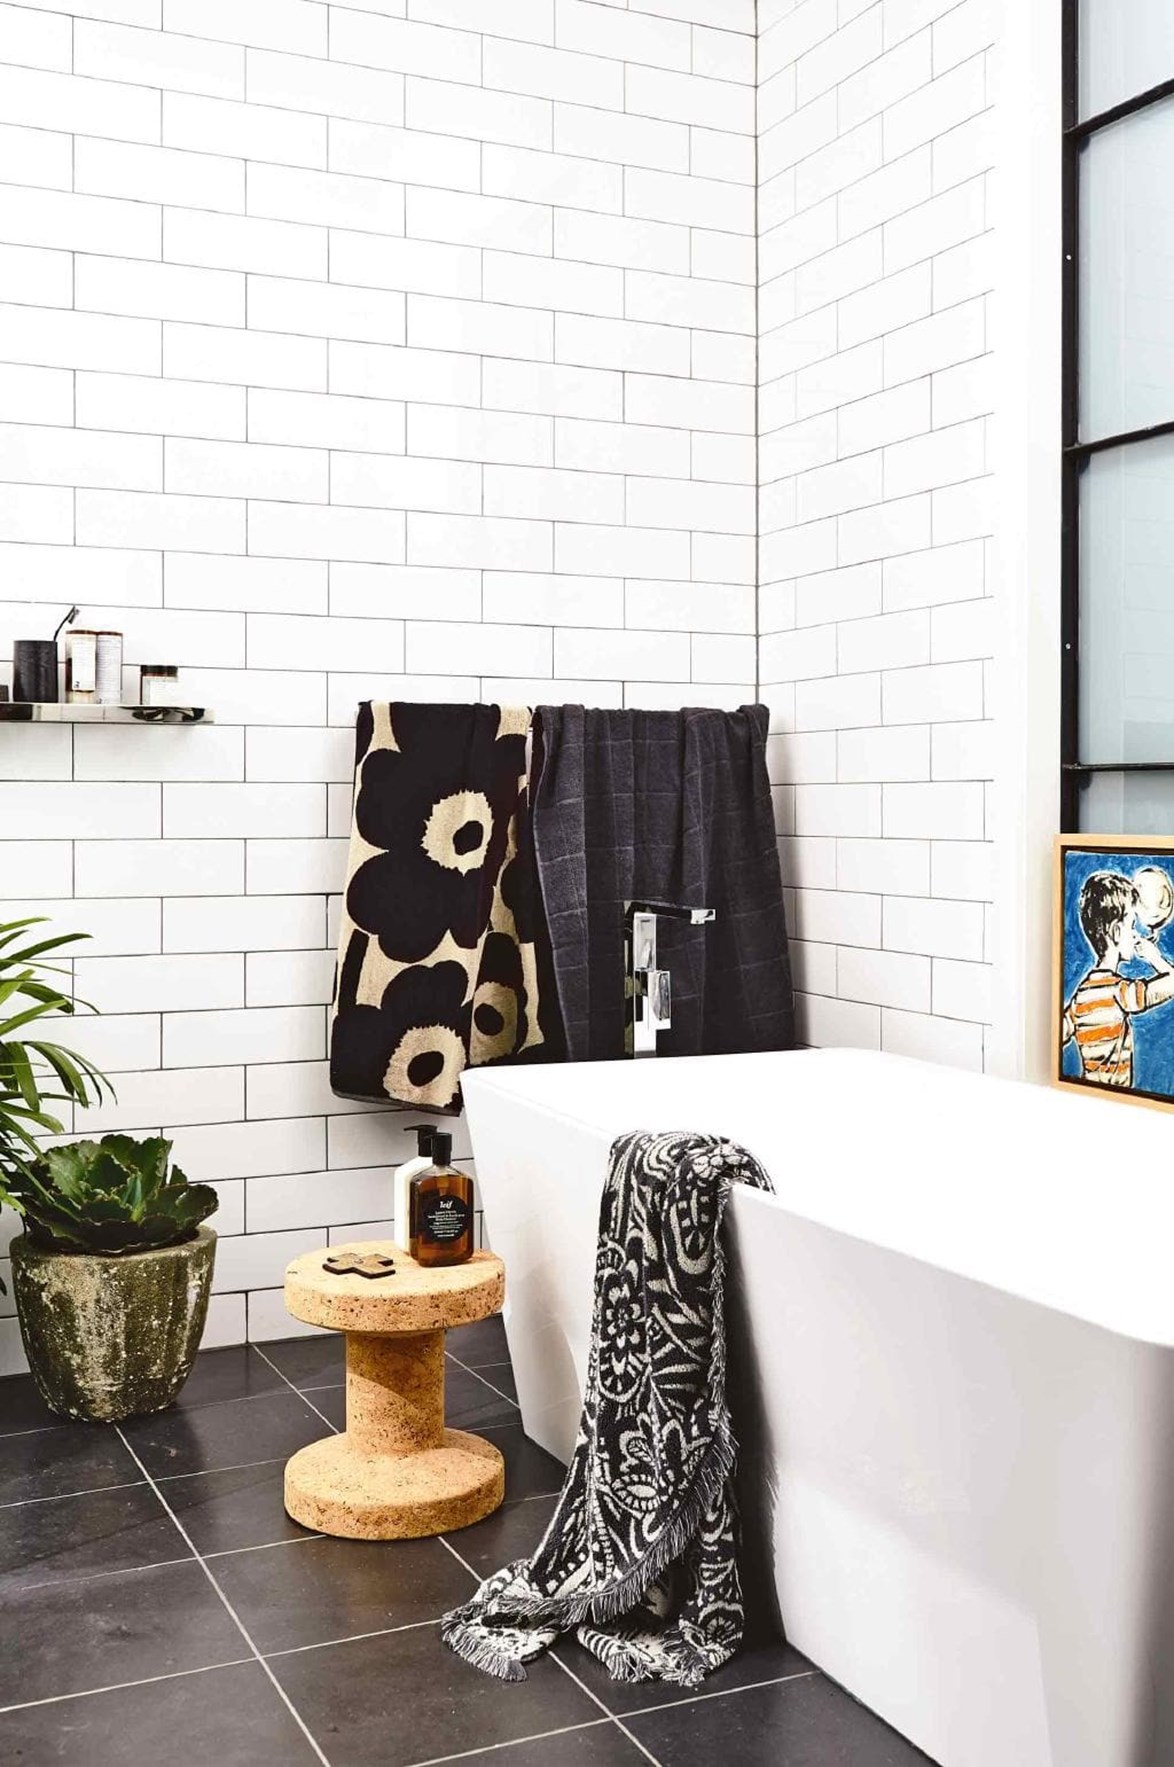 While a white bathroom will likely never go out of style, they can suffer from looking run-of-the-mill and clinical. Avoid this happening to you by accessorising with patterned towels and other textural objects like a cork stool or cement planter. *Photo: Derek Swalwell / Styling: Rachel Vigor*